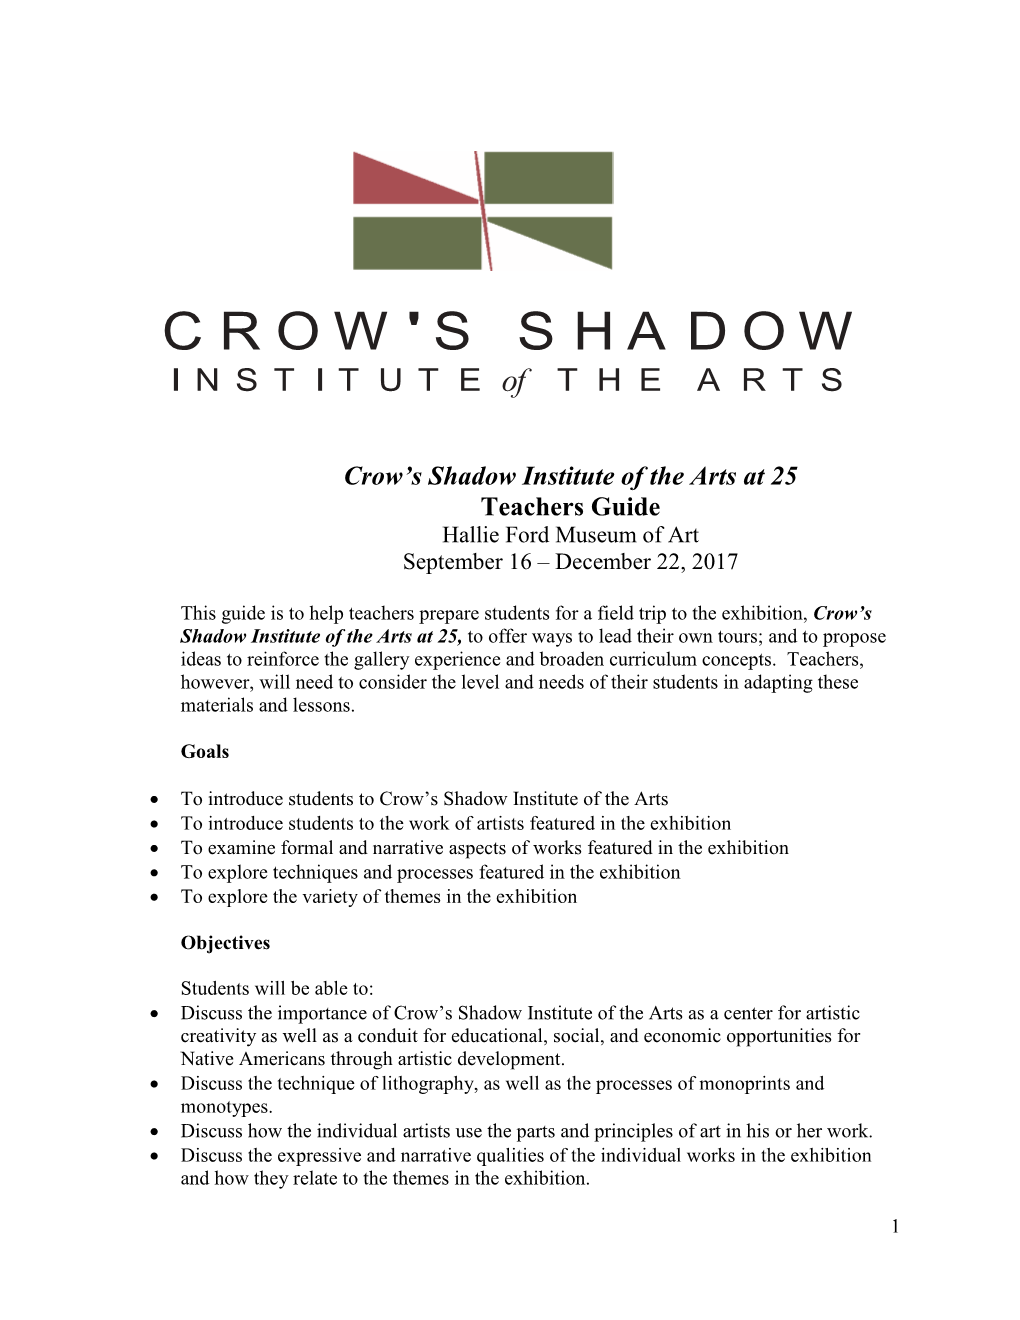 Crow's Shadow Institute of the Arts